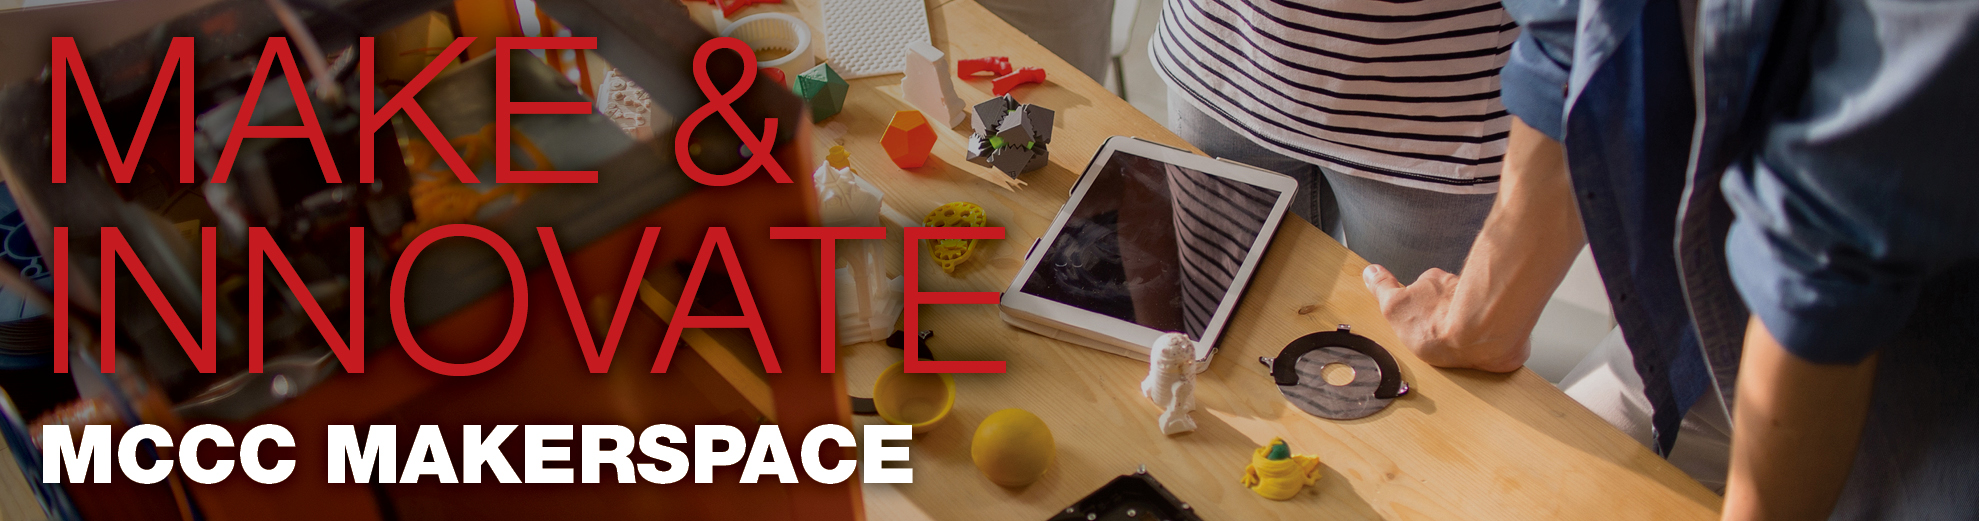 Makerspace graphic header image